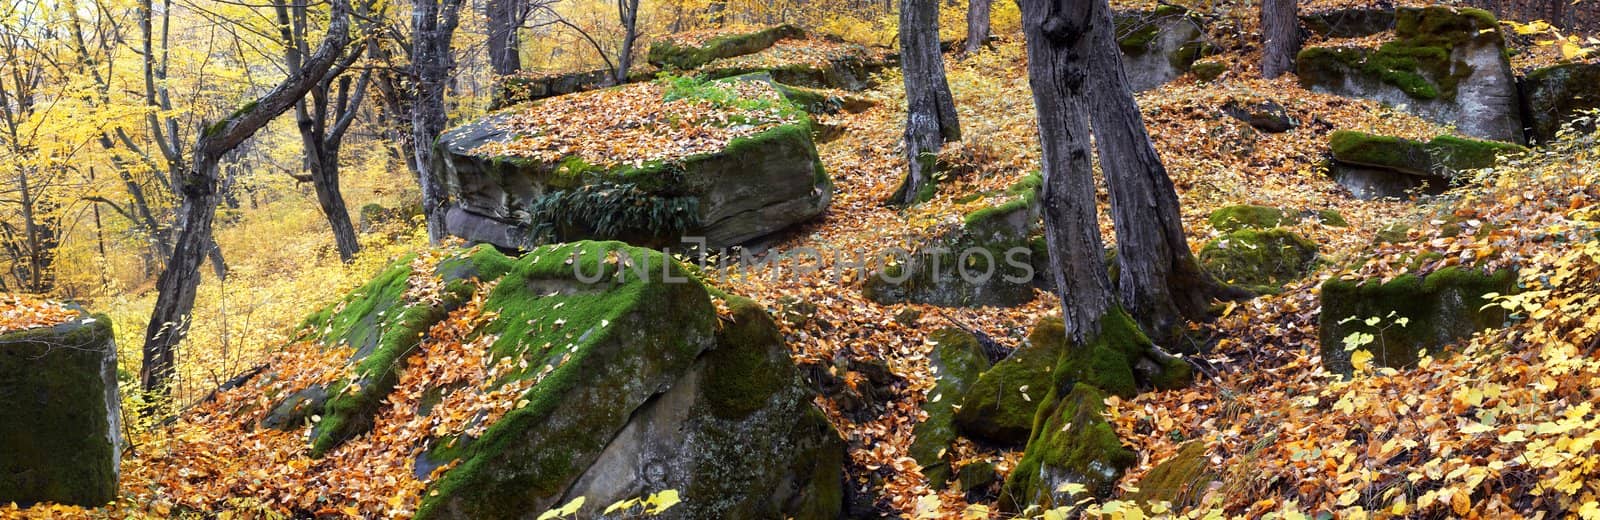 Stones in autumn forest by velkol